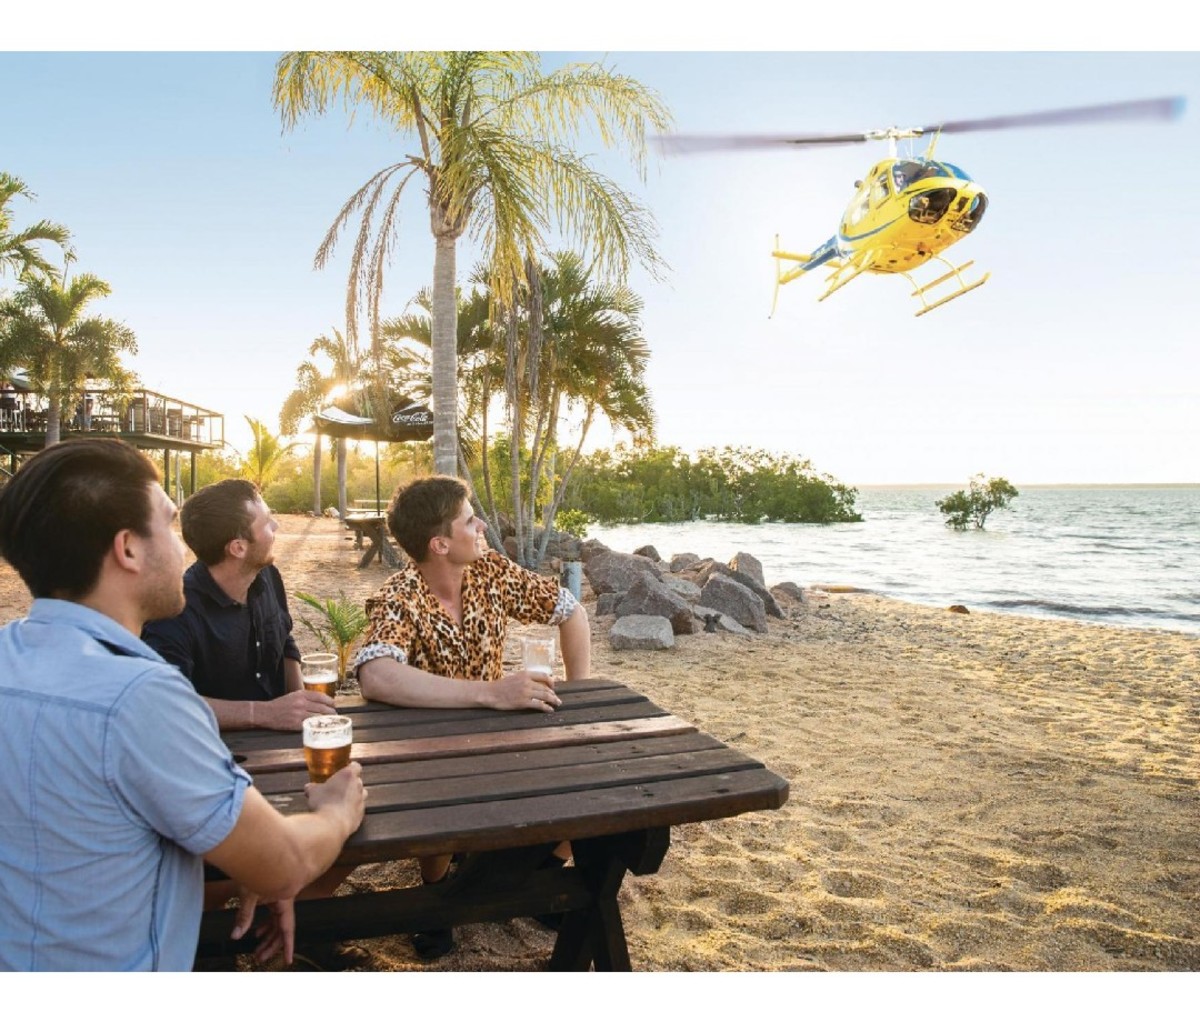 Three men at a table drinking beer watch a yellow helicopter landing on the beach in Northern Australia